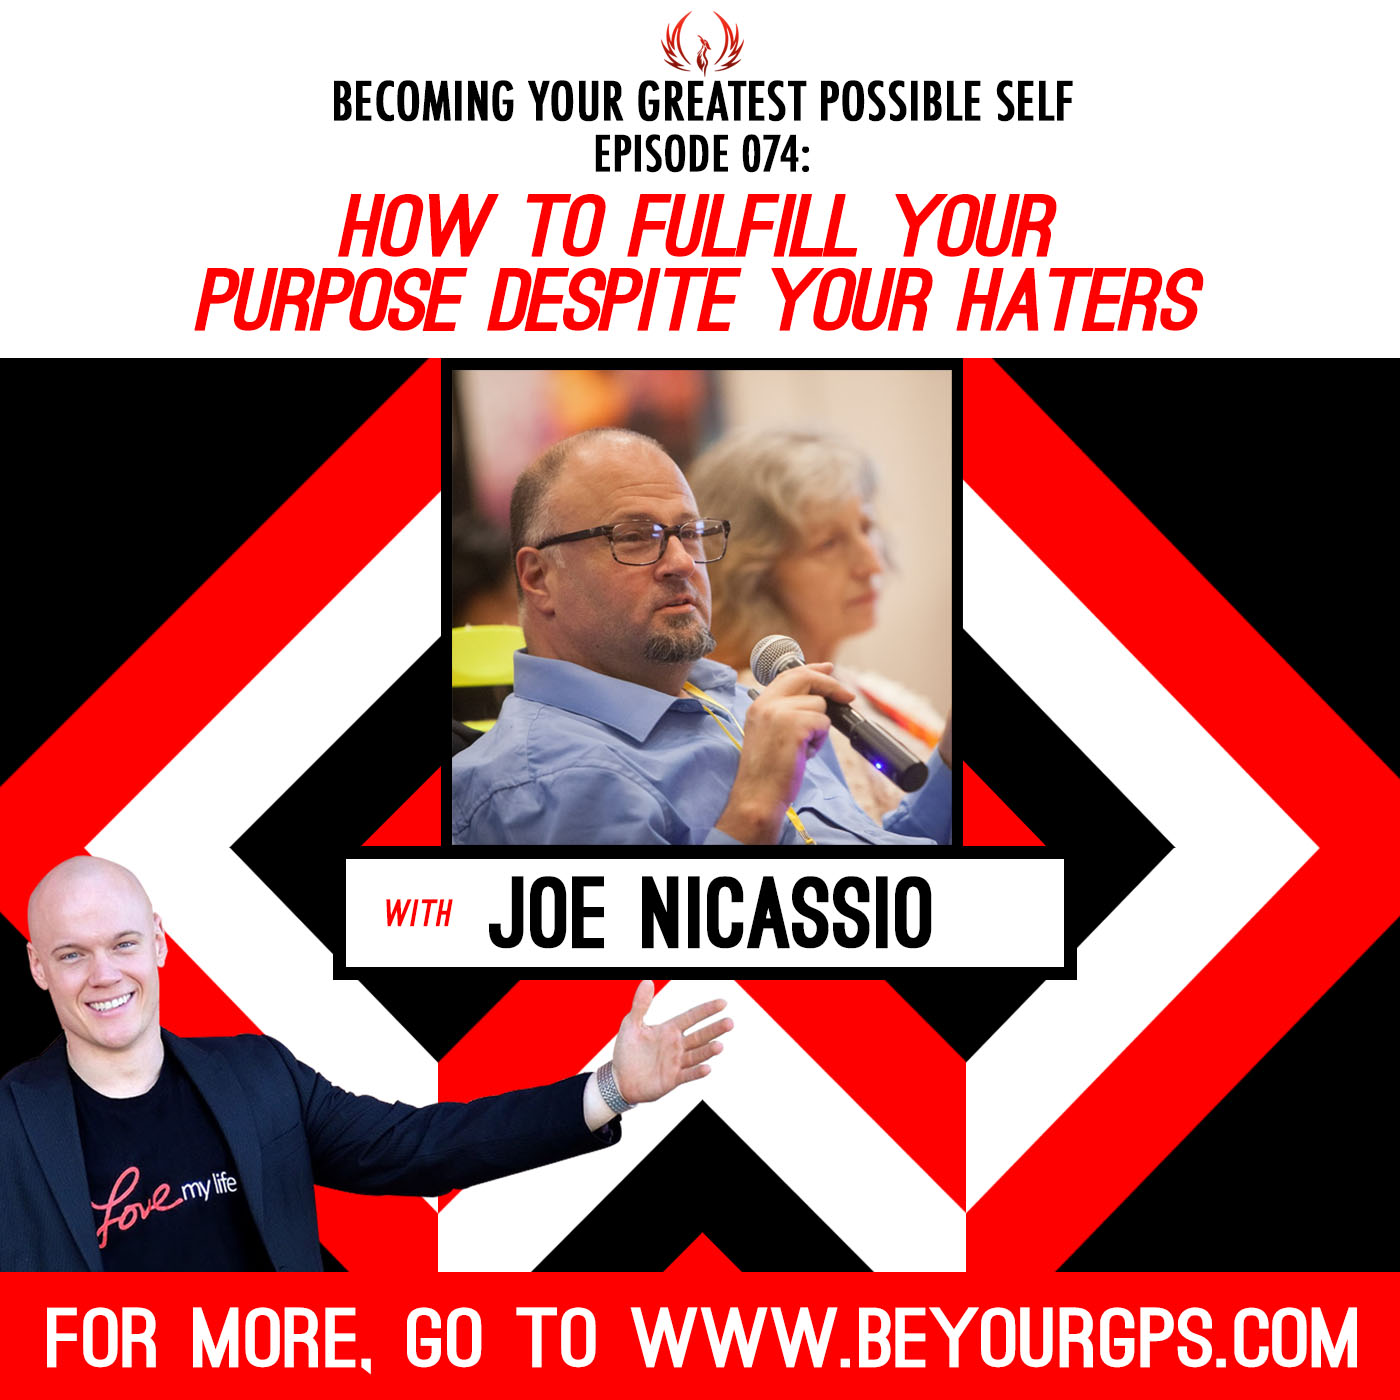 How To Fulfill Your Purpose Despite Your Haters with Joe Nicassio